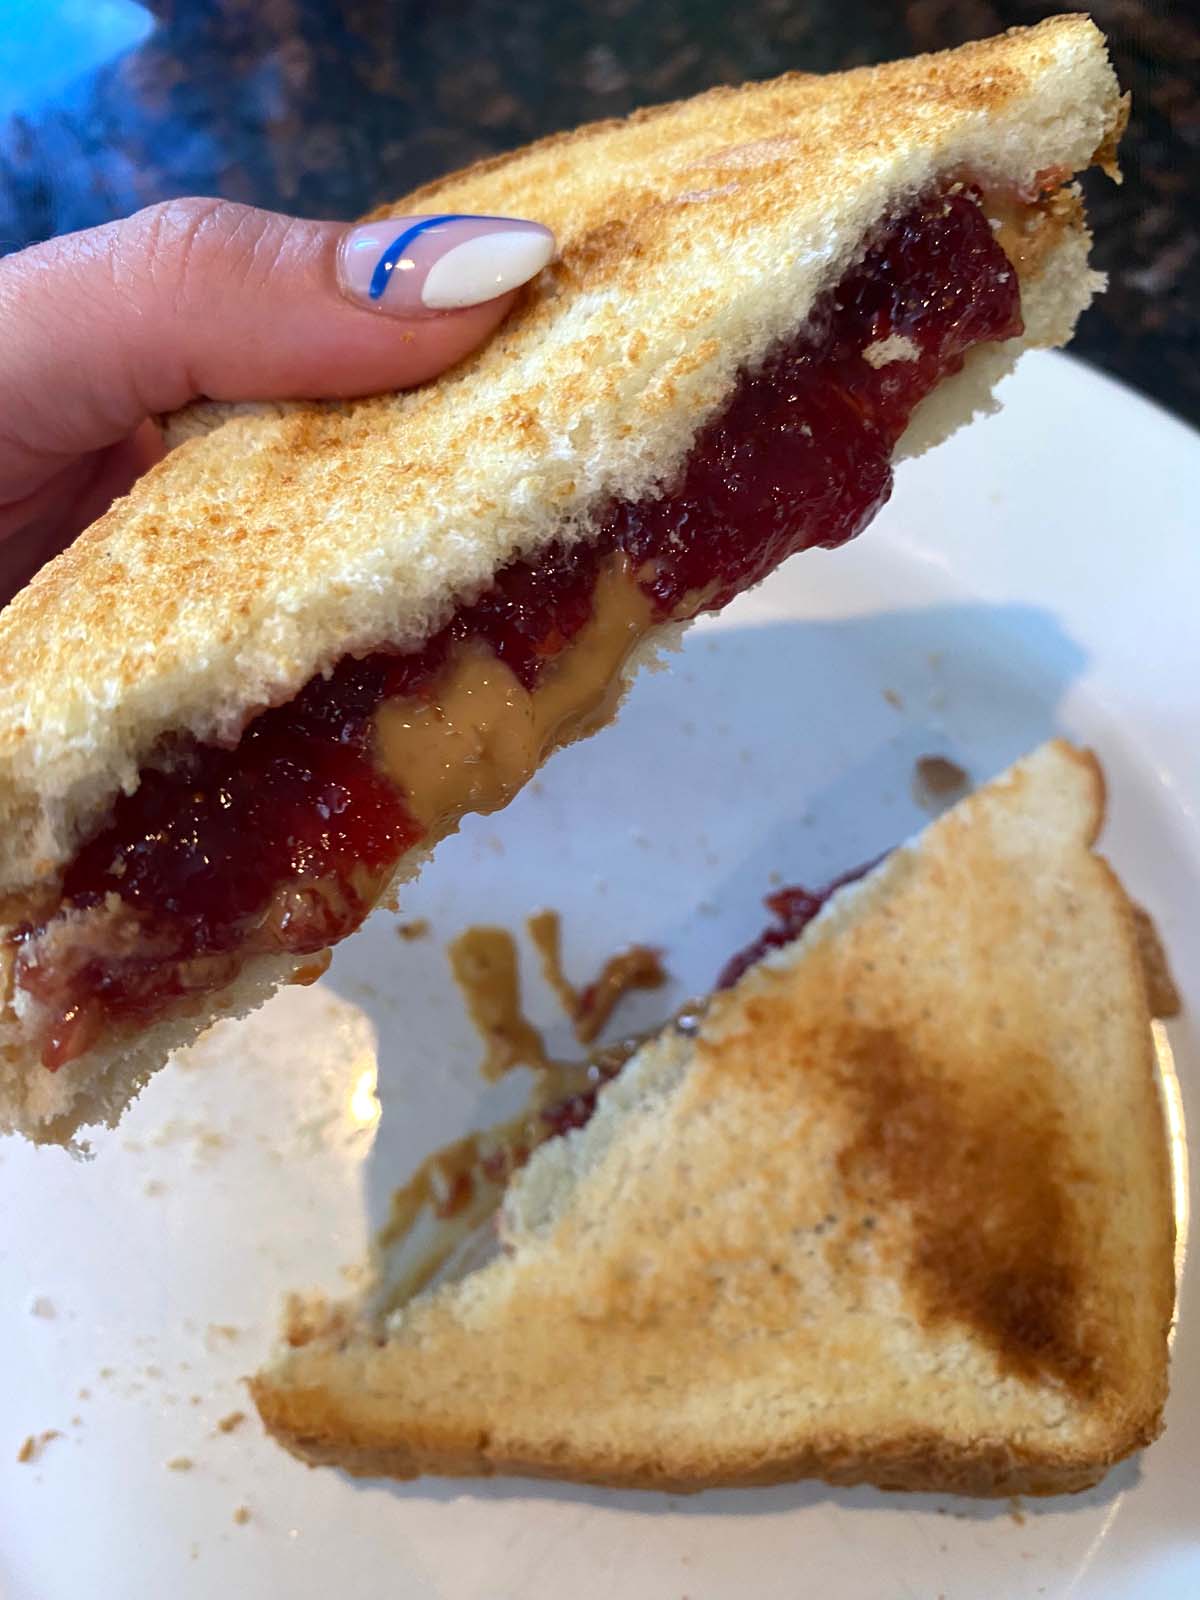 Toasted peanut butter and jelly on a white plate.